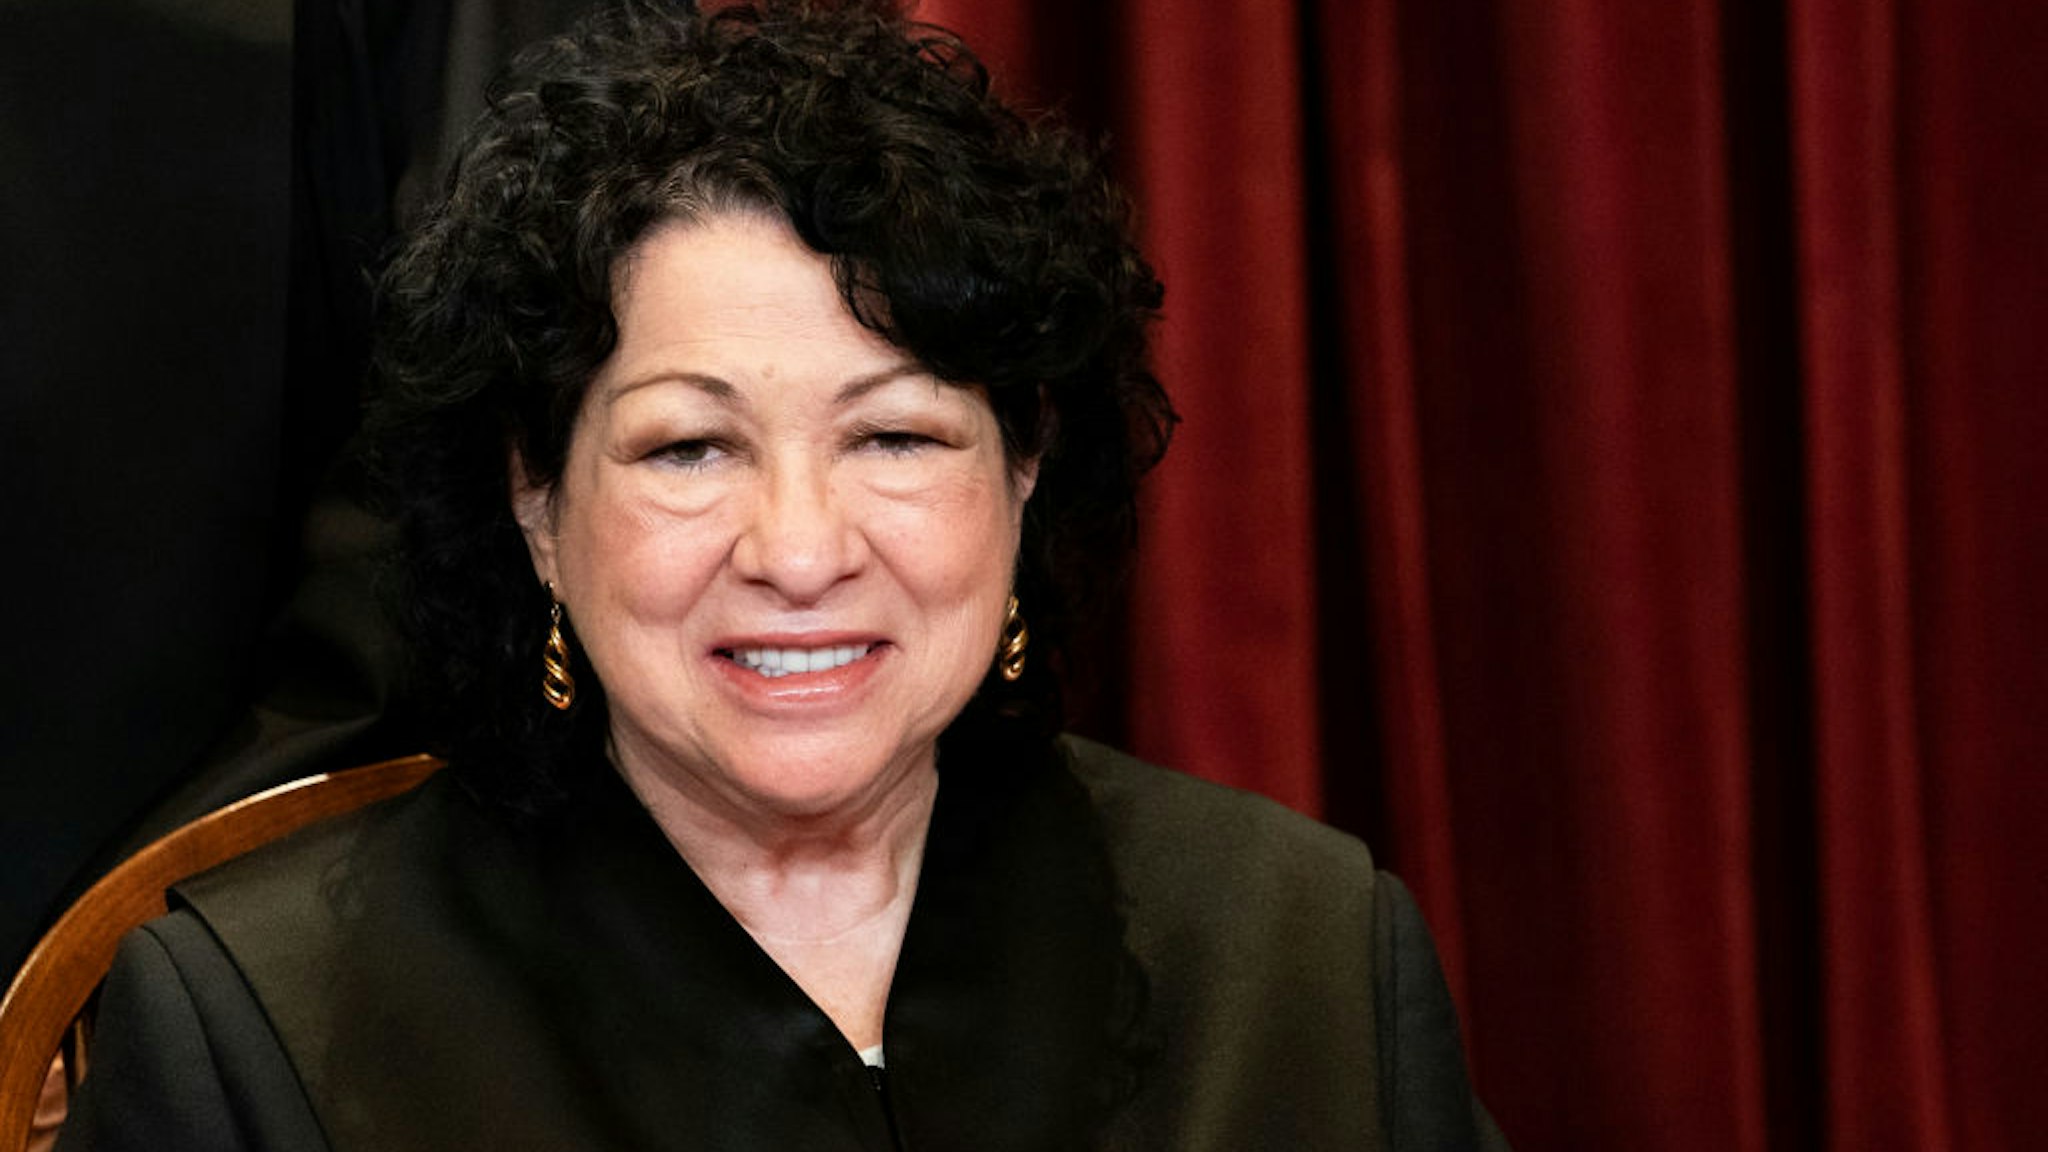 WASHINGTON, DC - APRIL 23: Associate Justice Sonia Sotomayor sits during a group photo of the Justices at the Supreme Court in Washington, DC on April 23, 2021. (Photo by Erin Schaff-Pool/Getty Images)